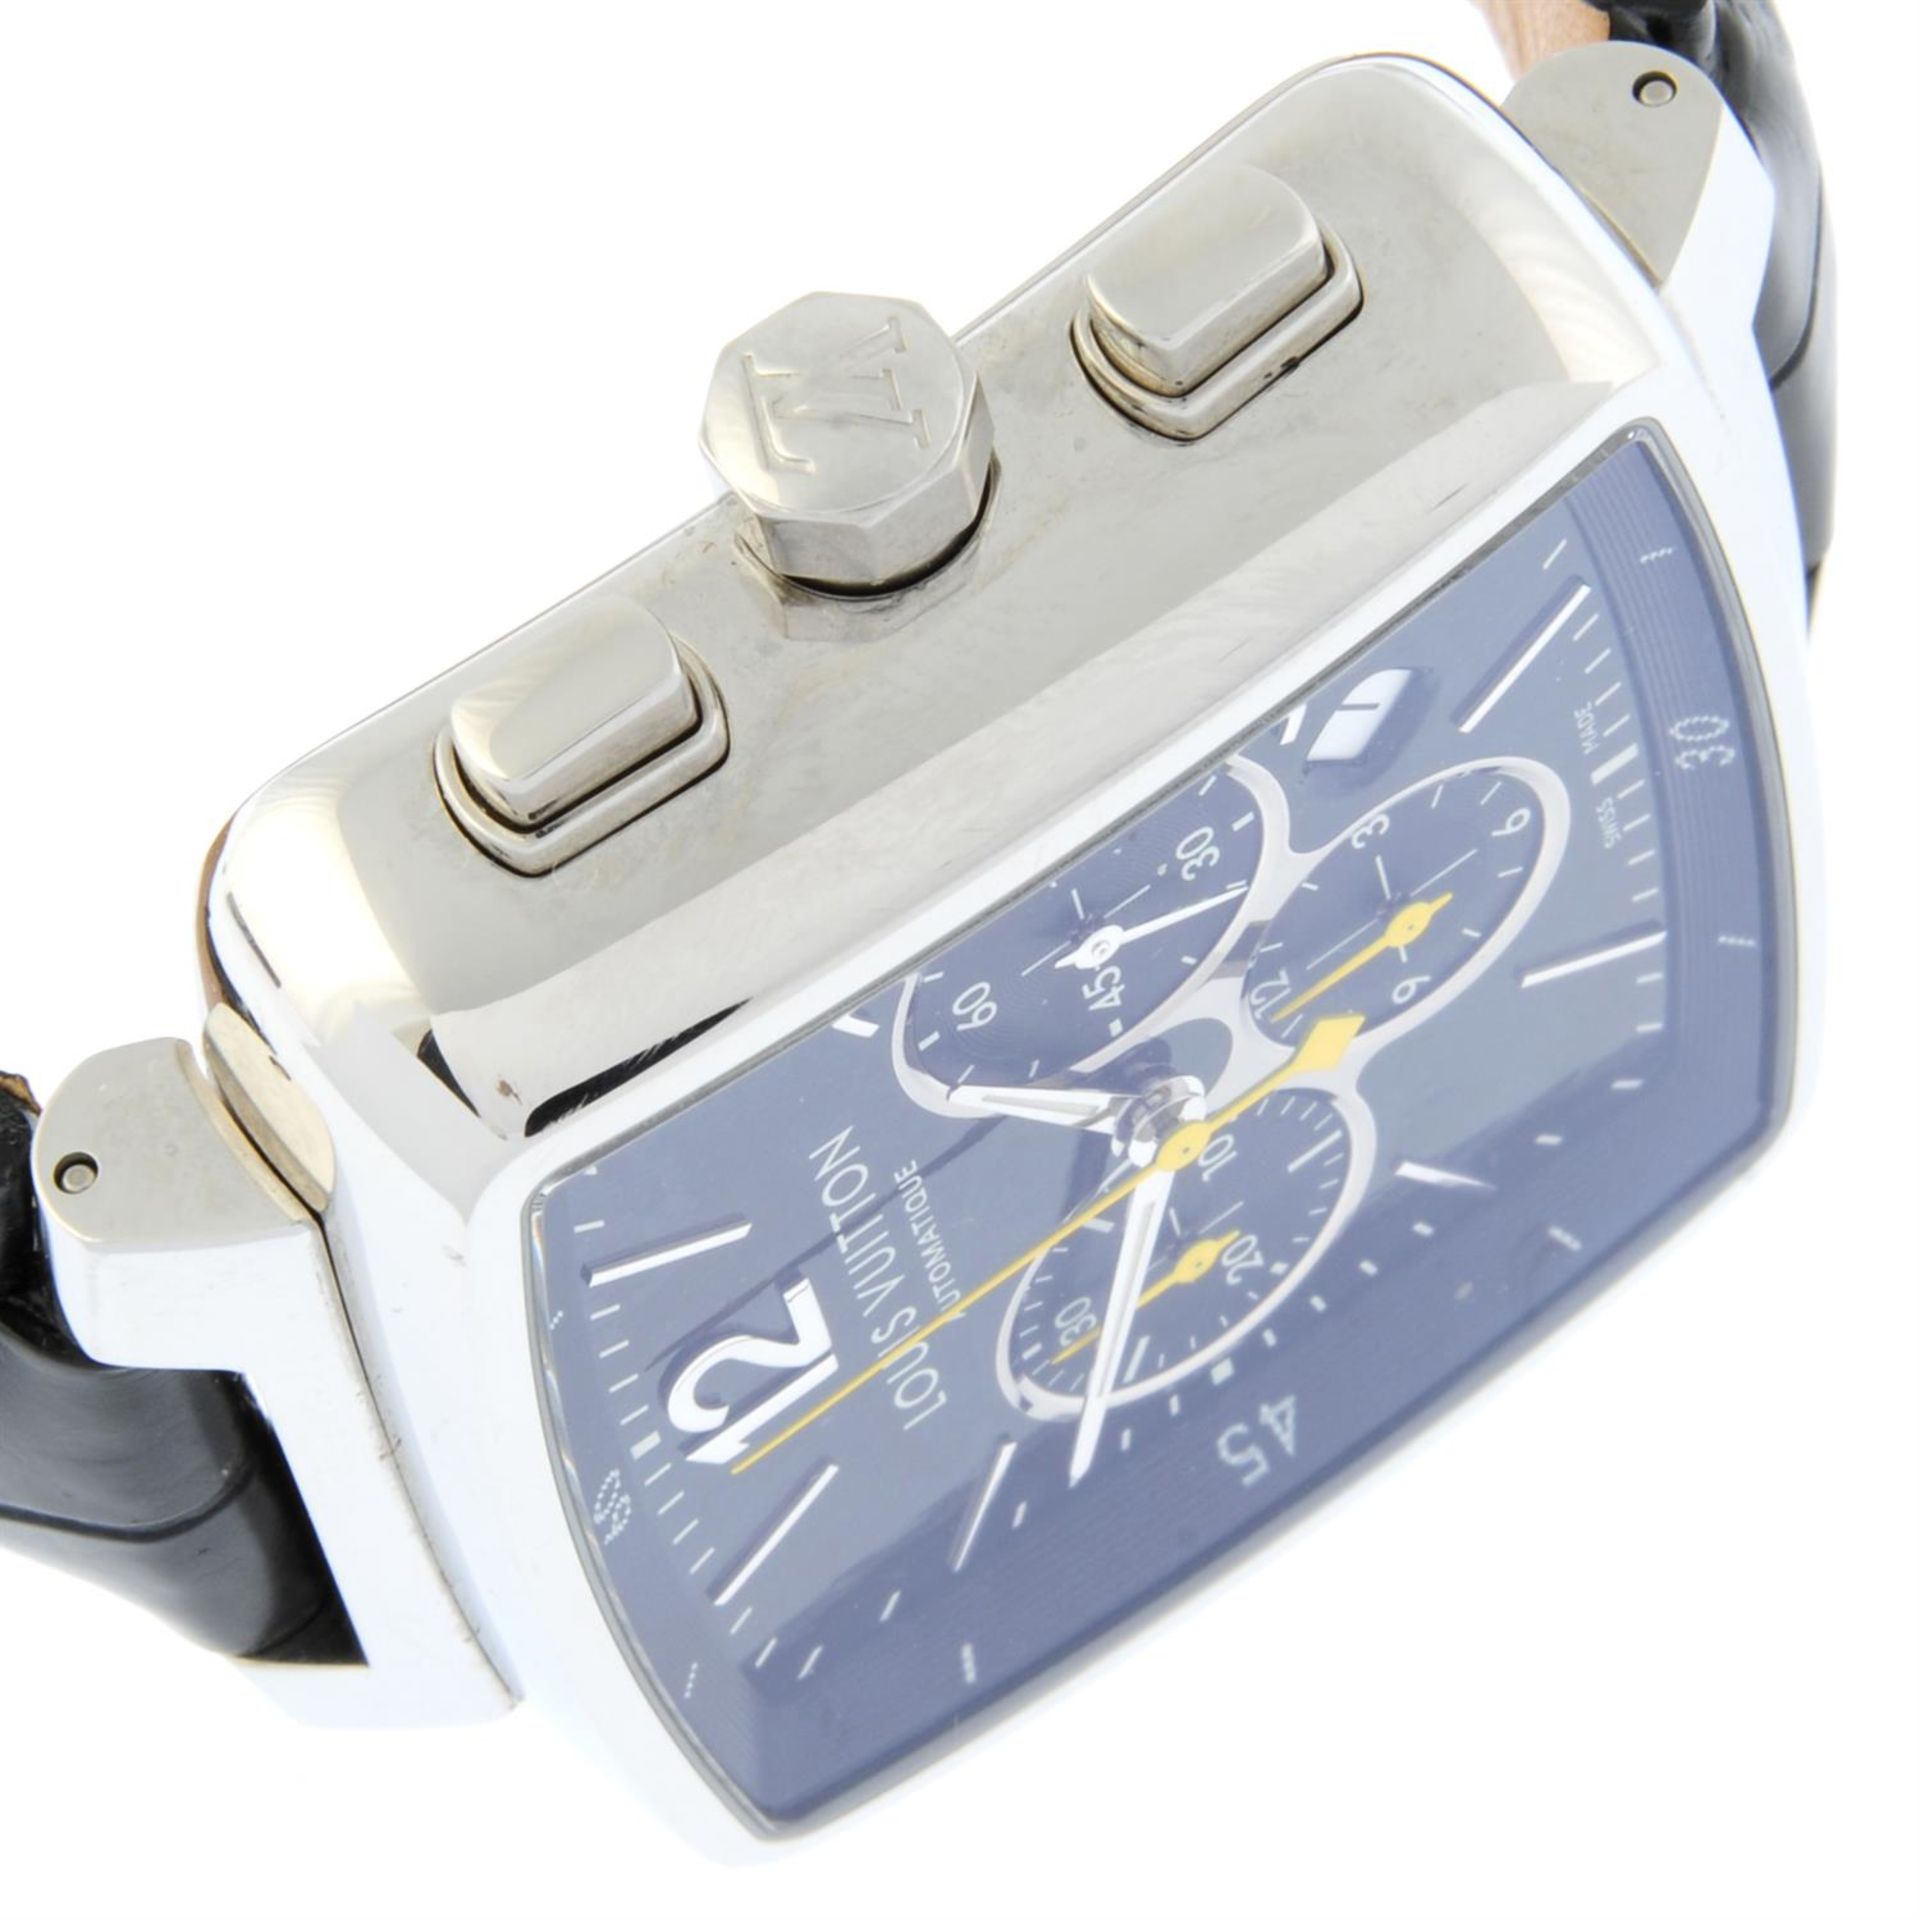 Louis Vuitton - a Speedy chronograph watch, 41x41mm. - Image 3 of 6